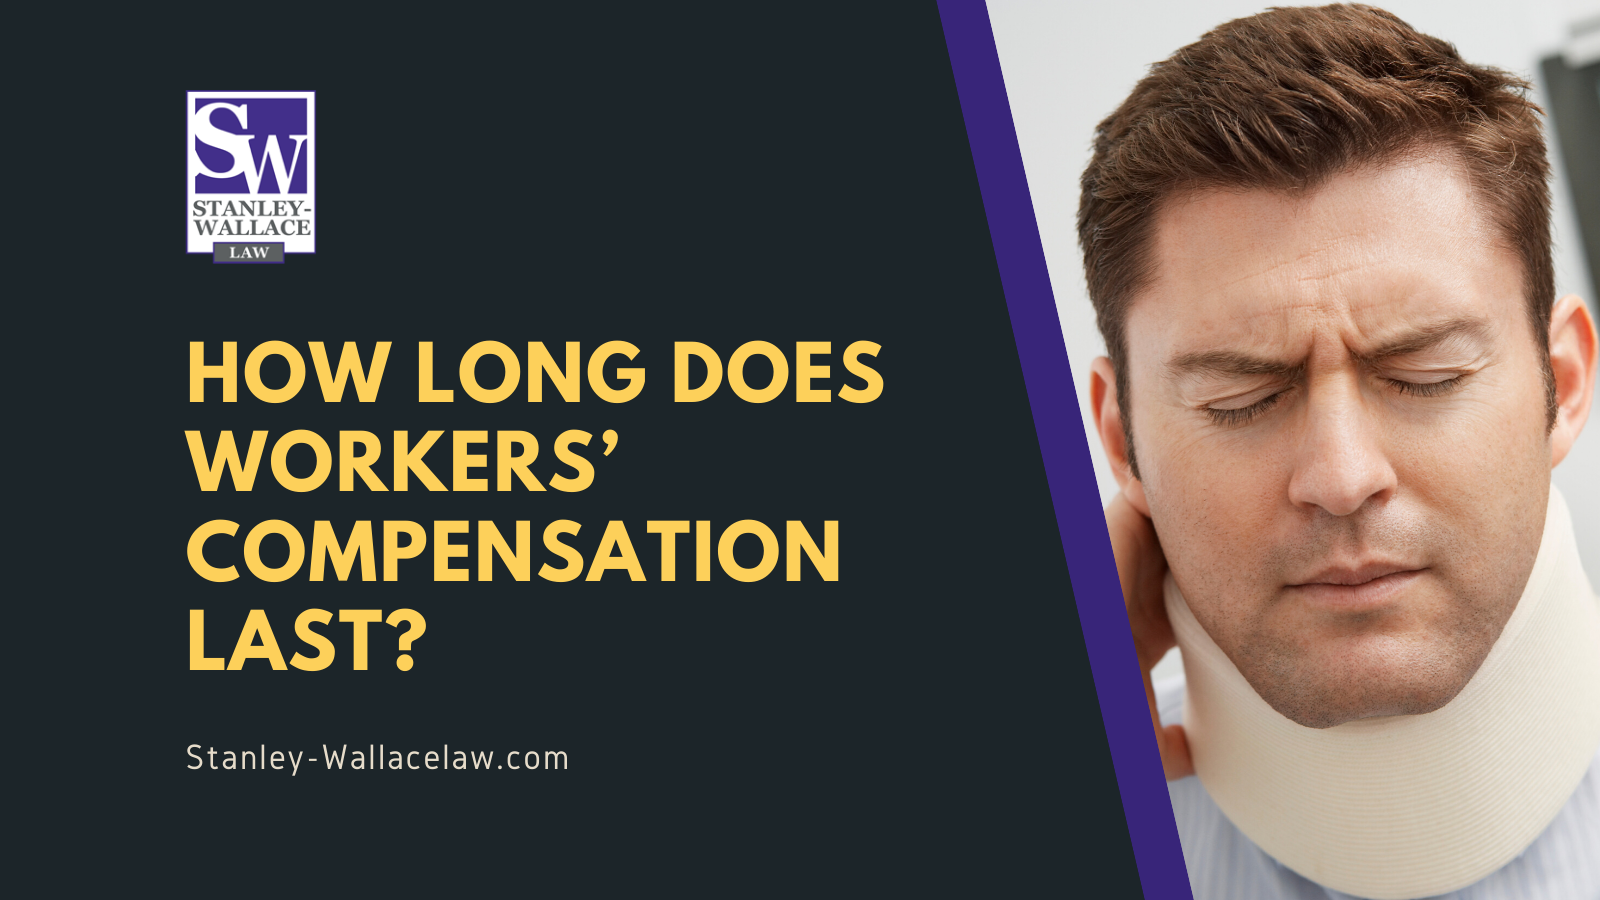 How long does workers’ compensation last - Stanley-Wallace Law - slidell louisiana